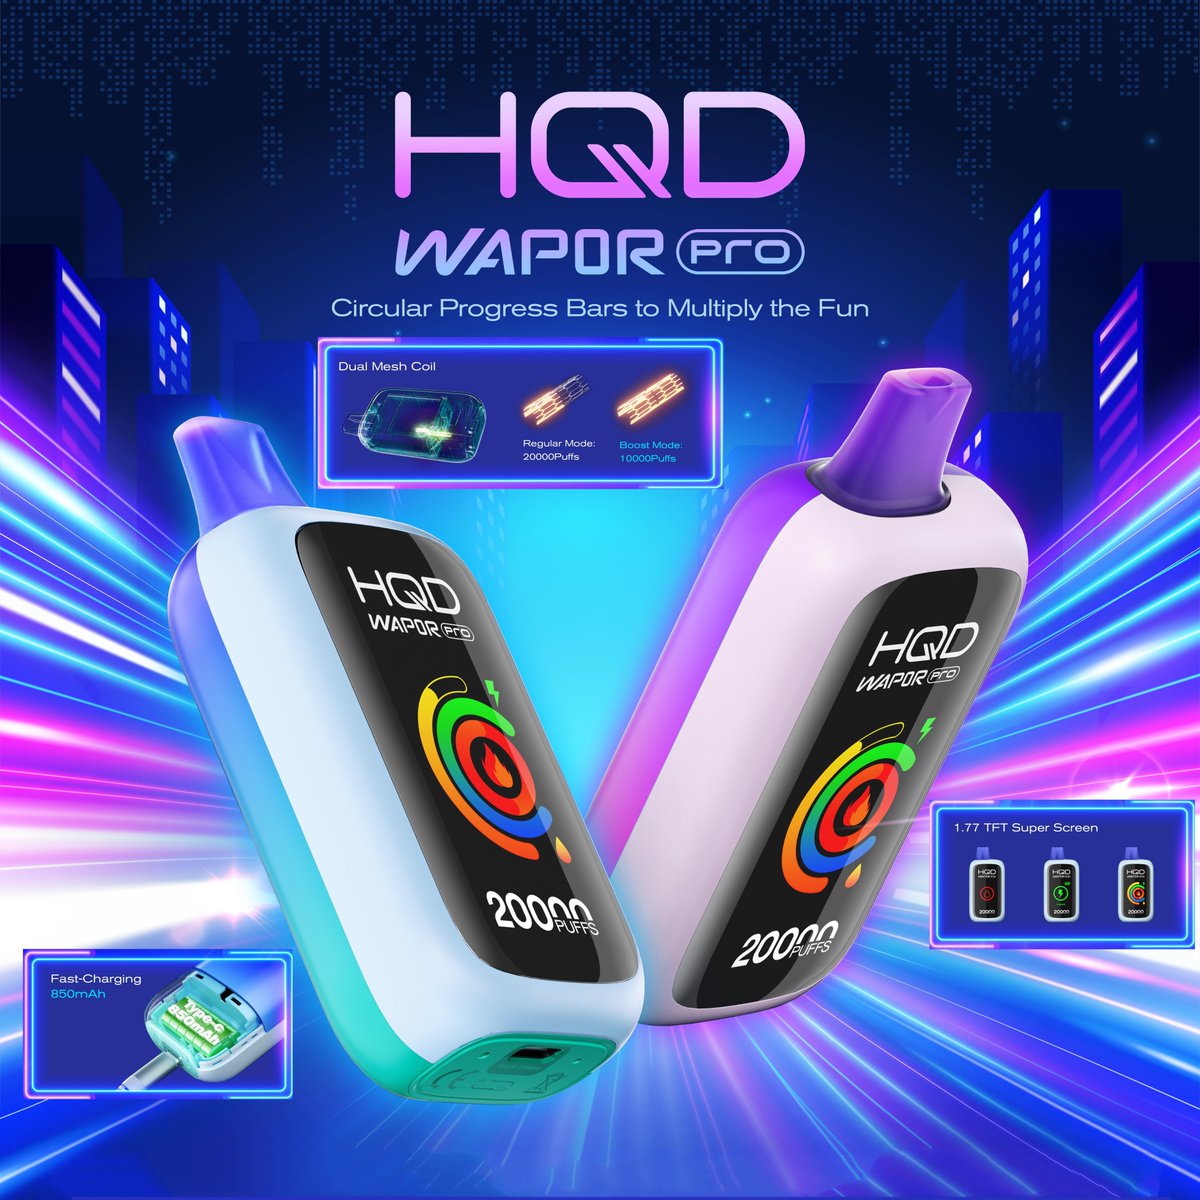 #HQD WAPOR PRO #20000puffs 1️⃣Port 1S 9W 🔁 22W 2️⃣Dual Mesh Coil 20k 🔁 10k 3️⃣24ML 4️⃣1.77 TFT Screen 5️⃣Fast Charing Warning: The device is used with e-liquid which contains addictive chemical nicotine. For Adult use only. #disposables #vapetricks #vaping #vapewholesale #vapor